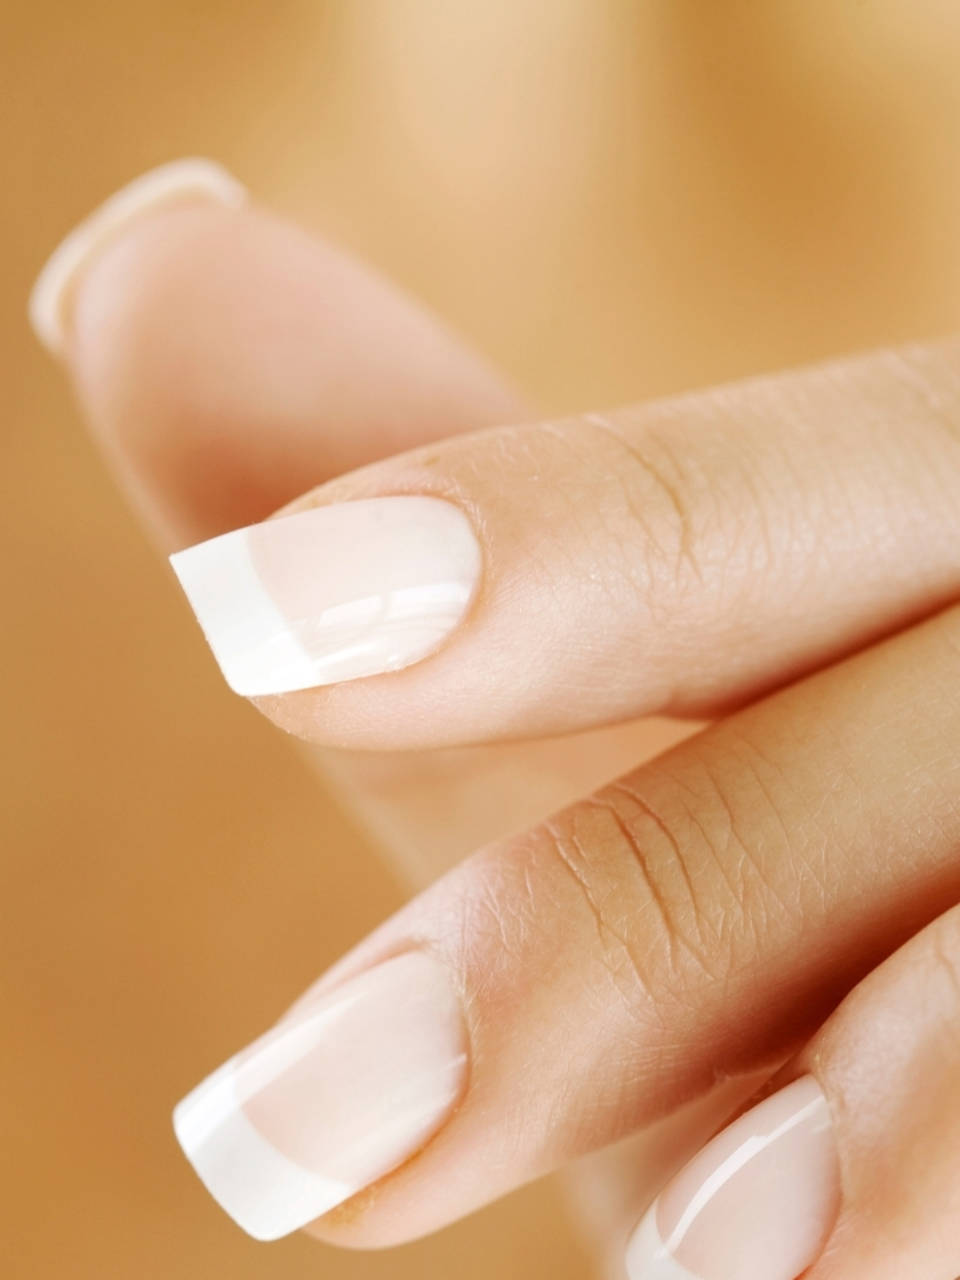 How to grow stronger, healthier nails | Times of India